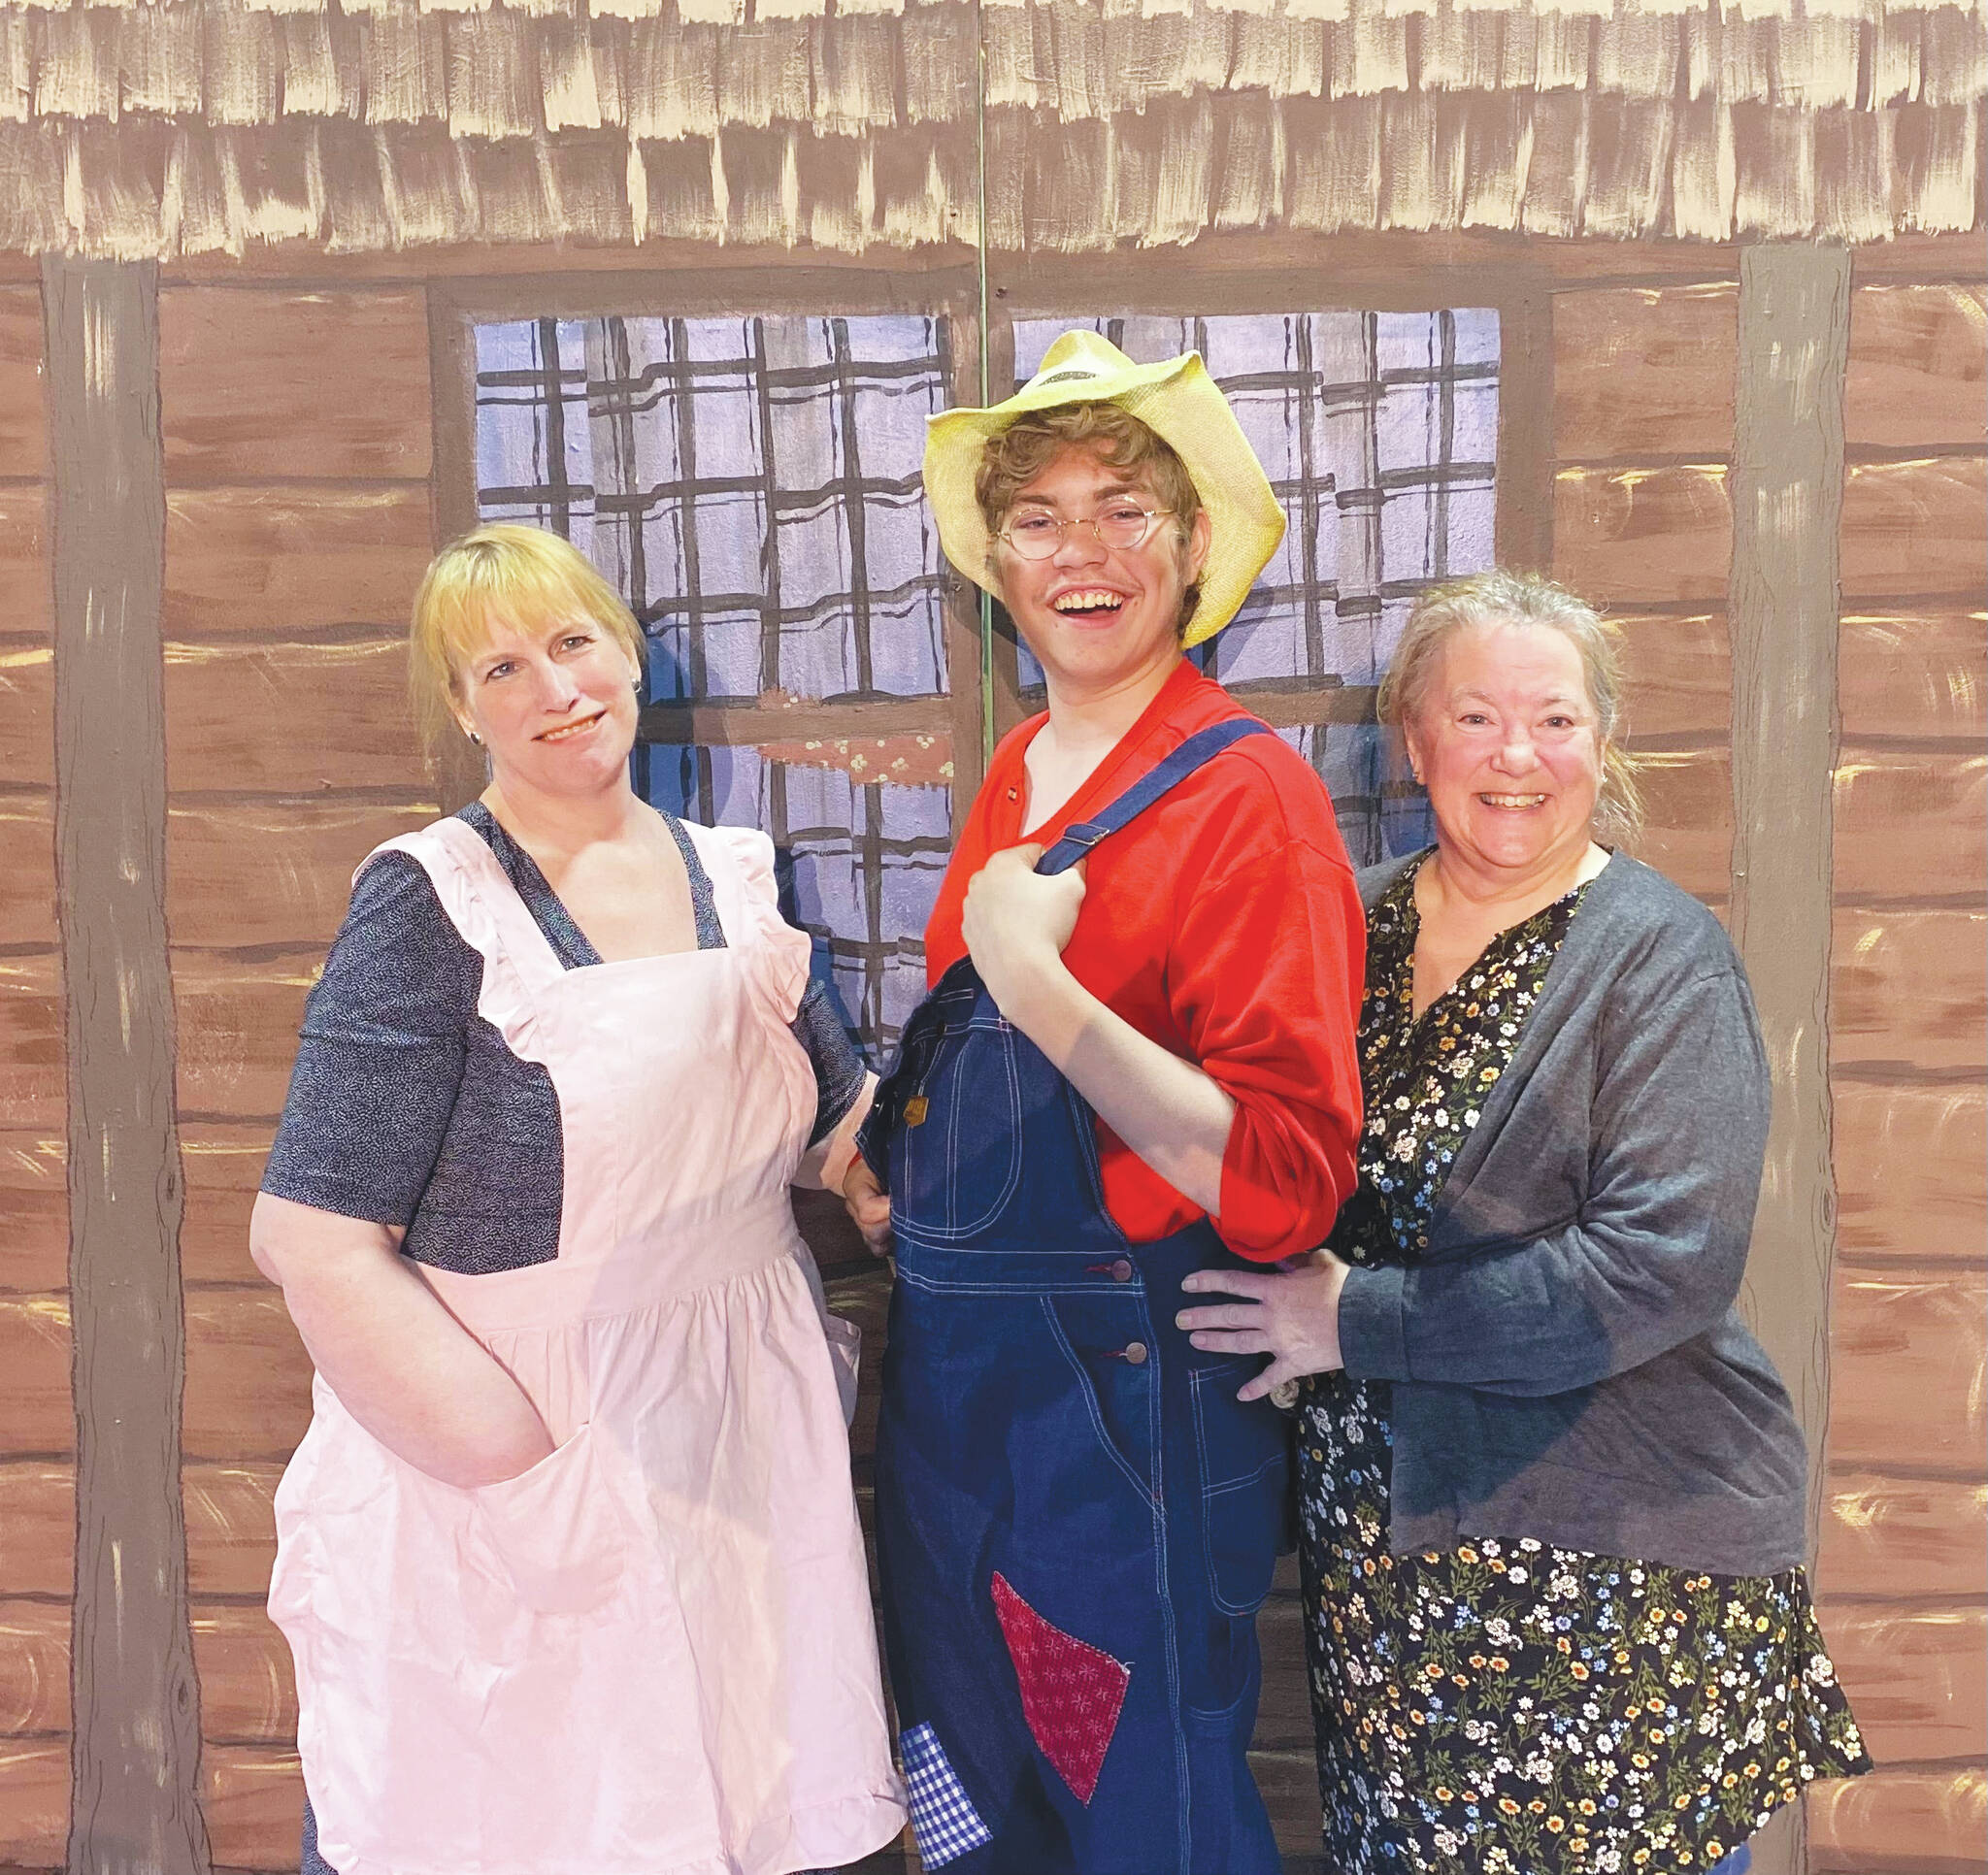 Members of the cast of Kenai Perfomers’ “The Beverly Hillbillies, the Musical” pose in September 2021. (Photo courtesy Terri Burdick)